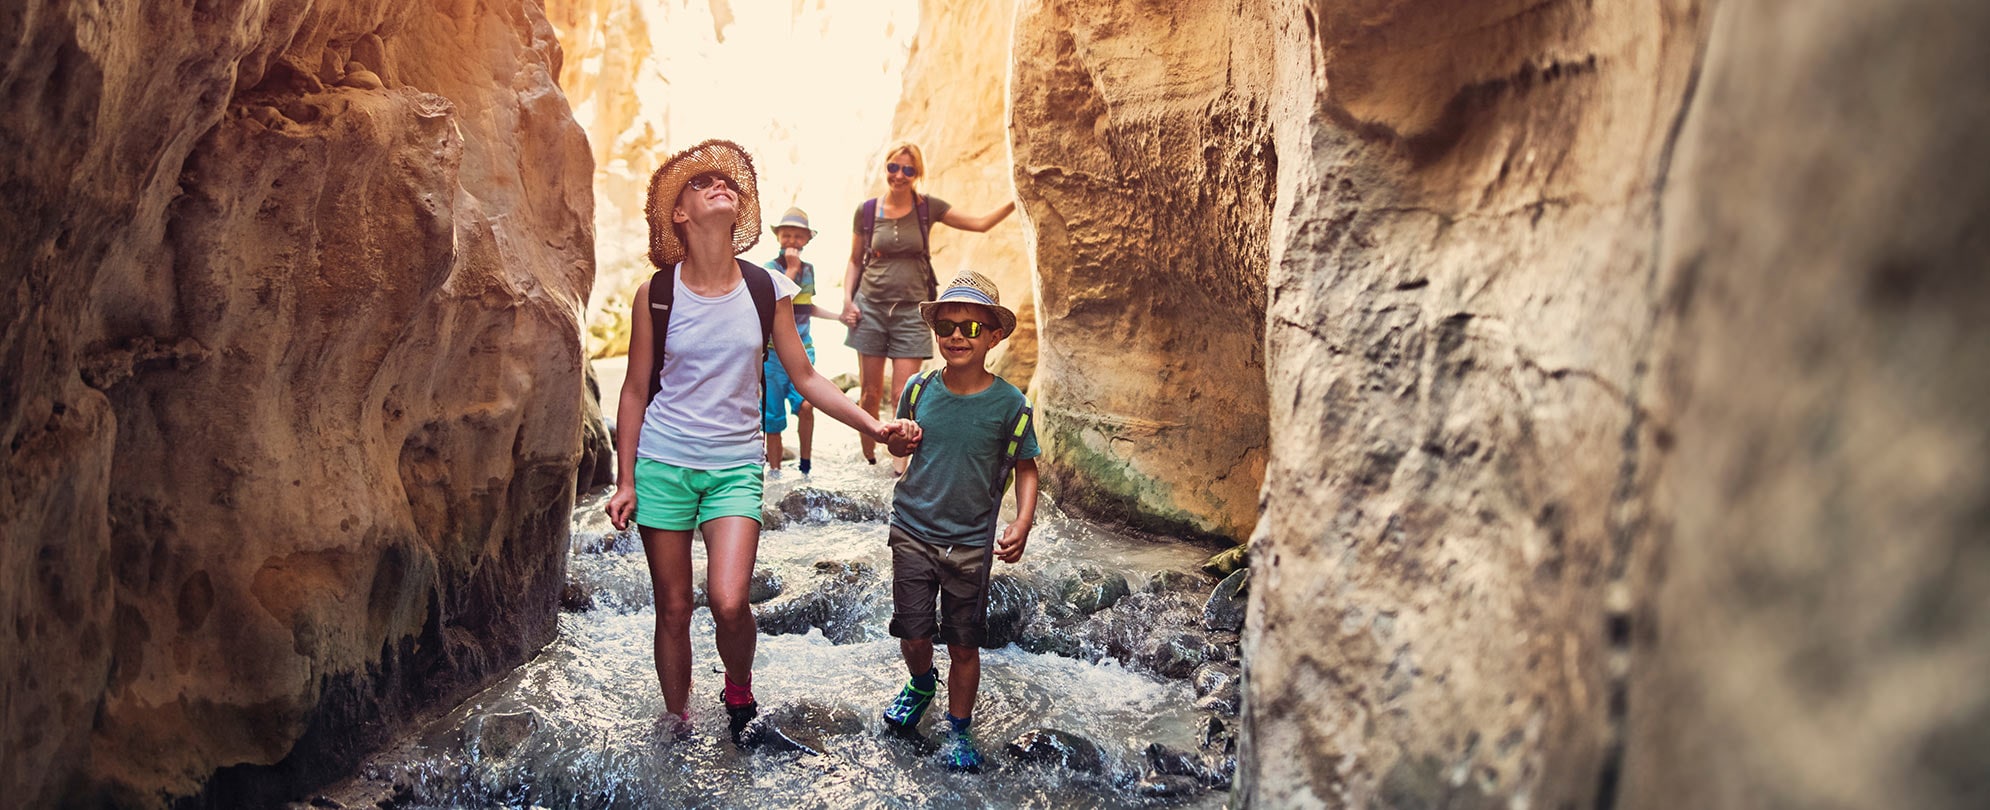 A family of four, hiking through a cave at National Park Moab.